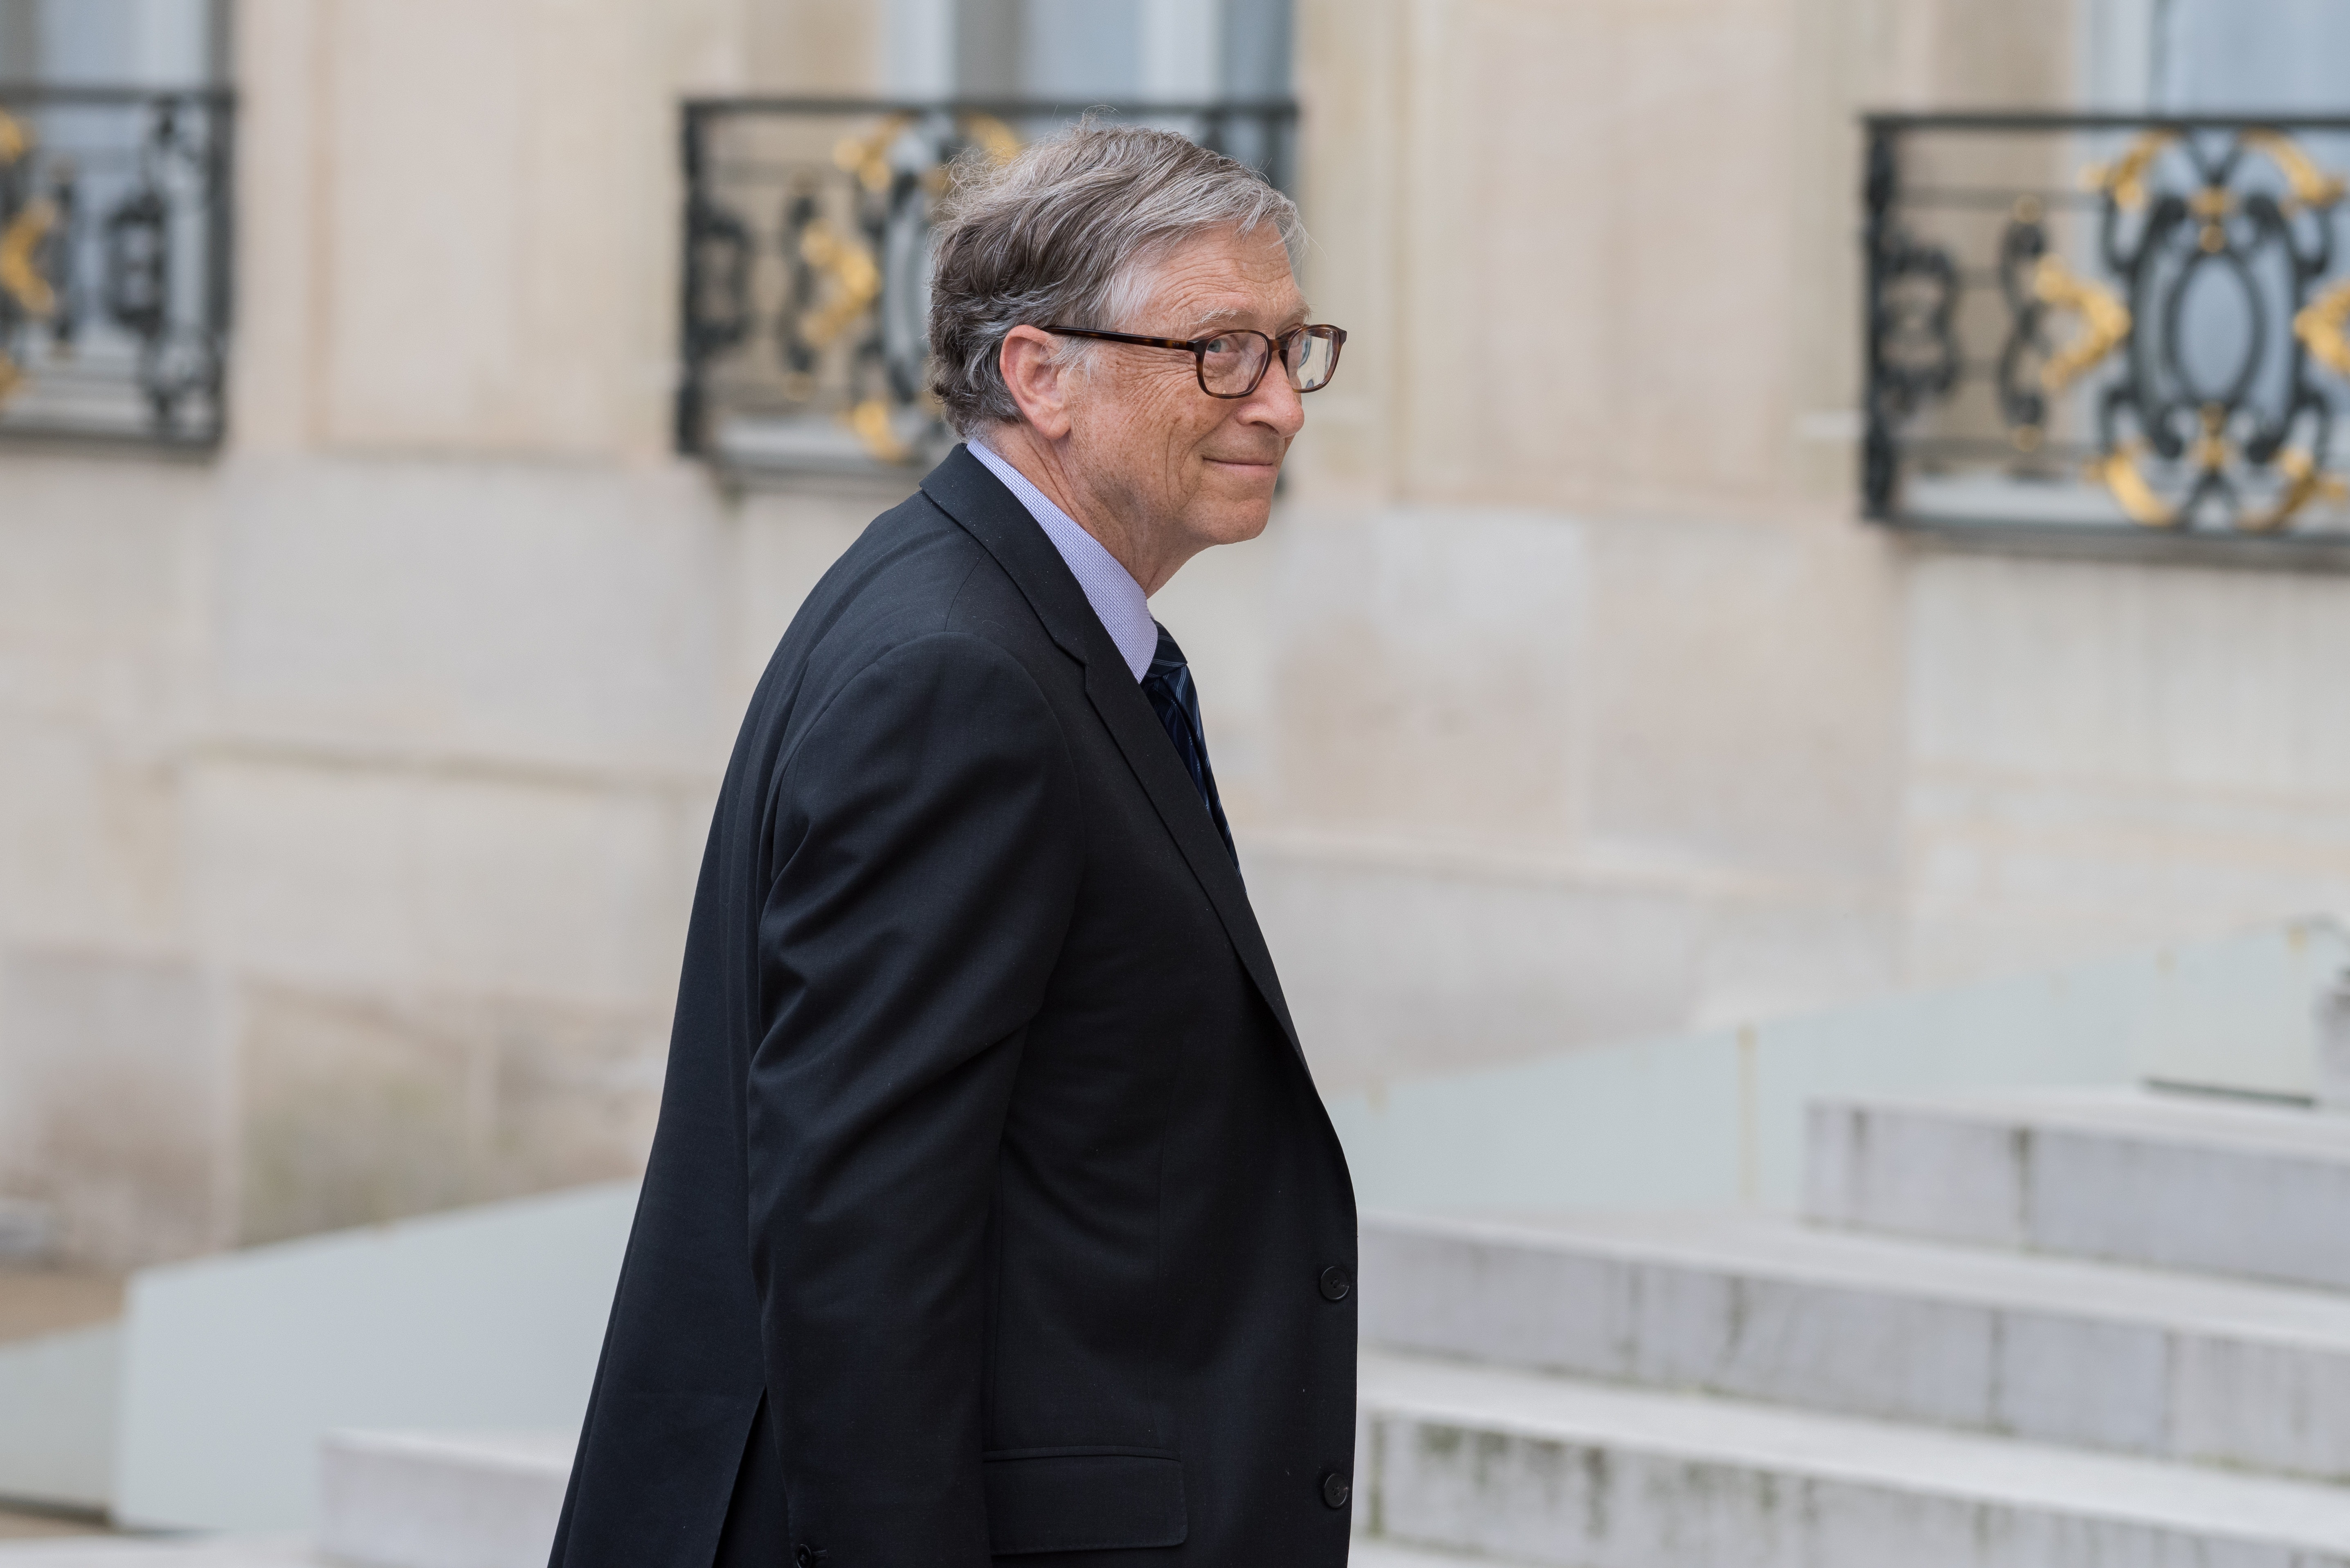 Bill Gates Sees This Small Silver Lining In The Russia-Ukraine War